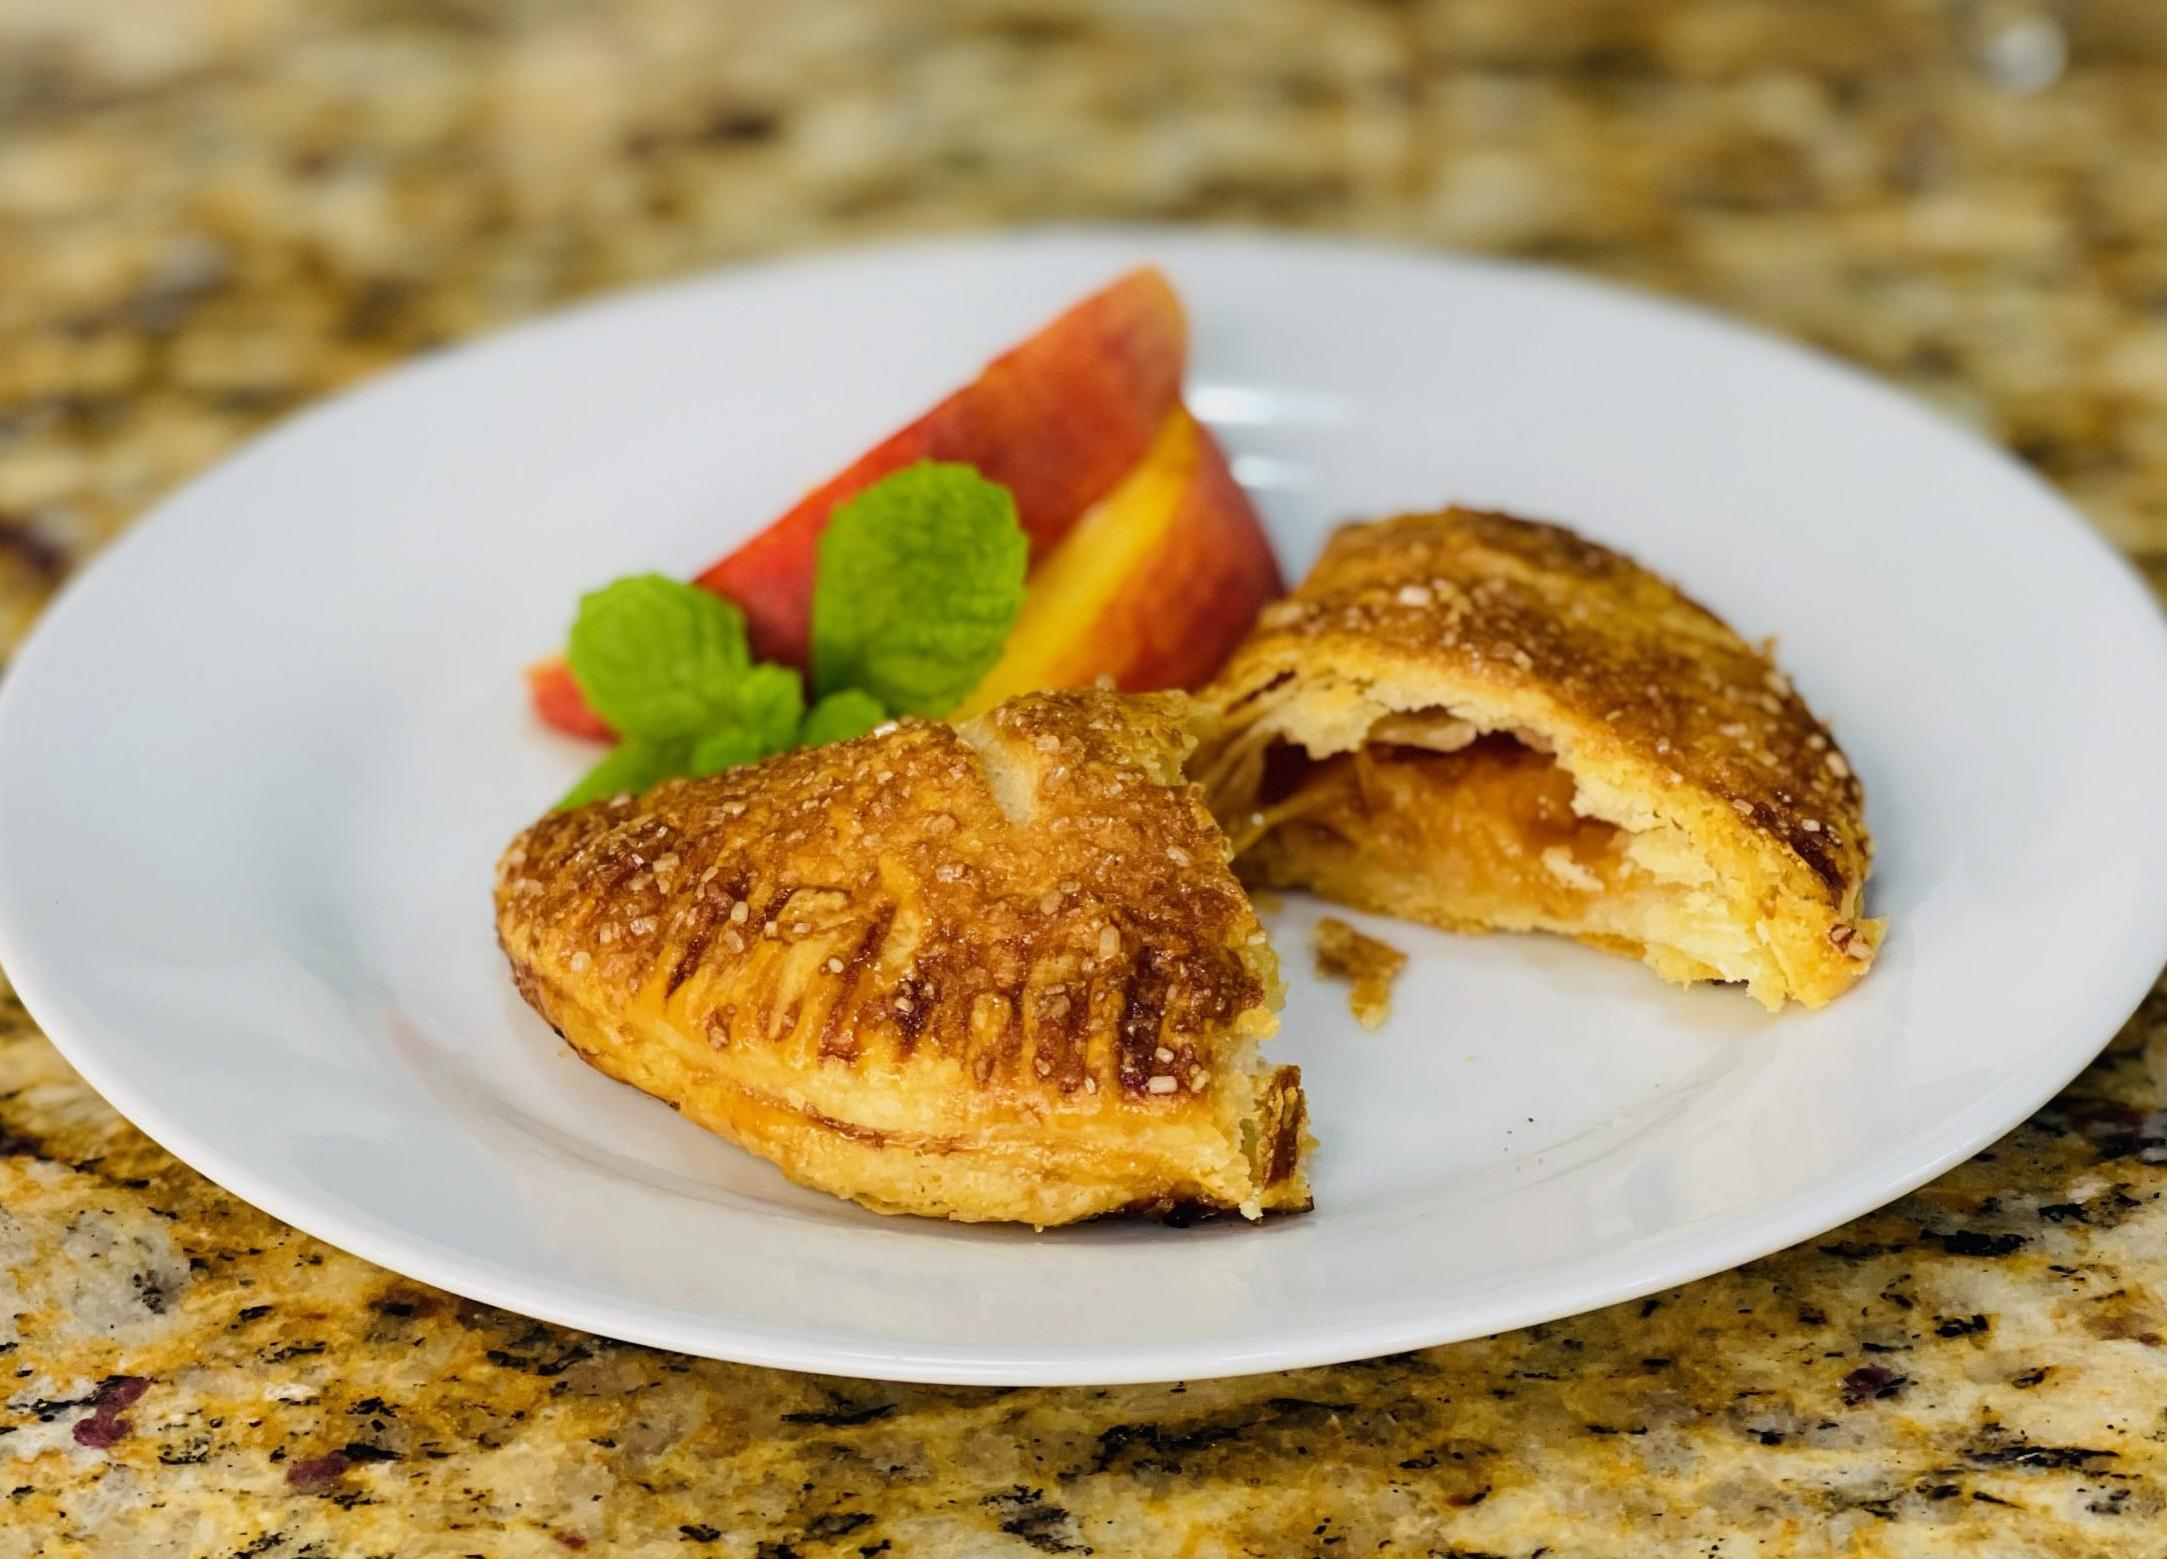  These empanadas are the perfect treat for breakfast, dessert, or any time in between!